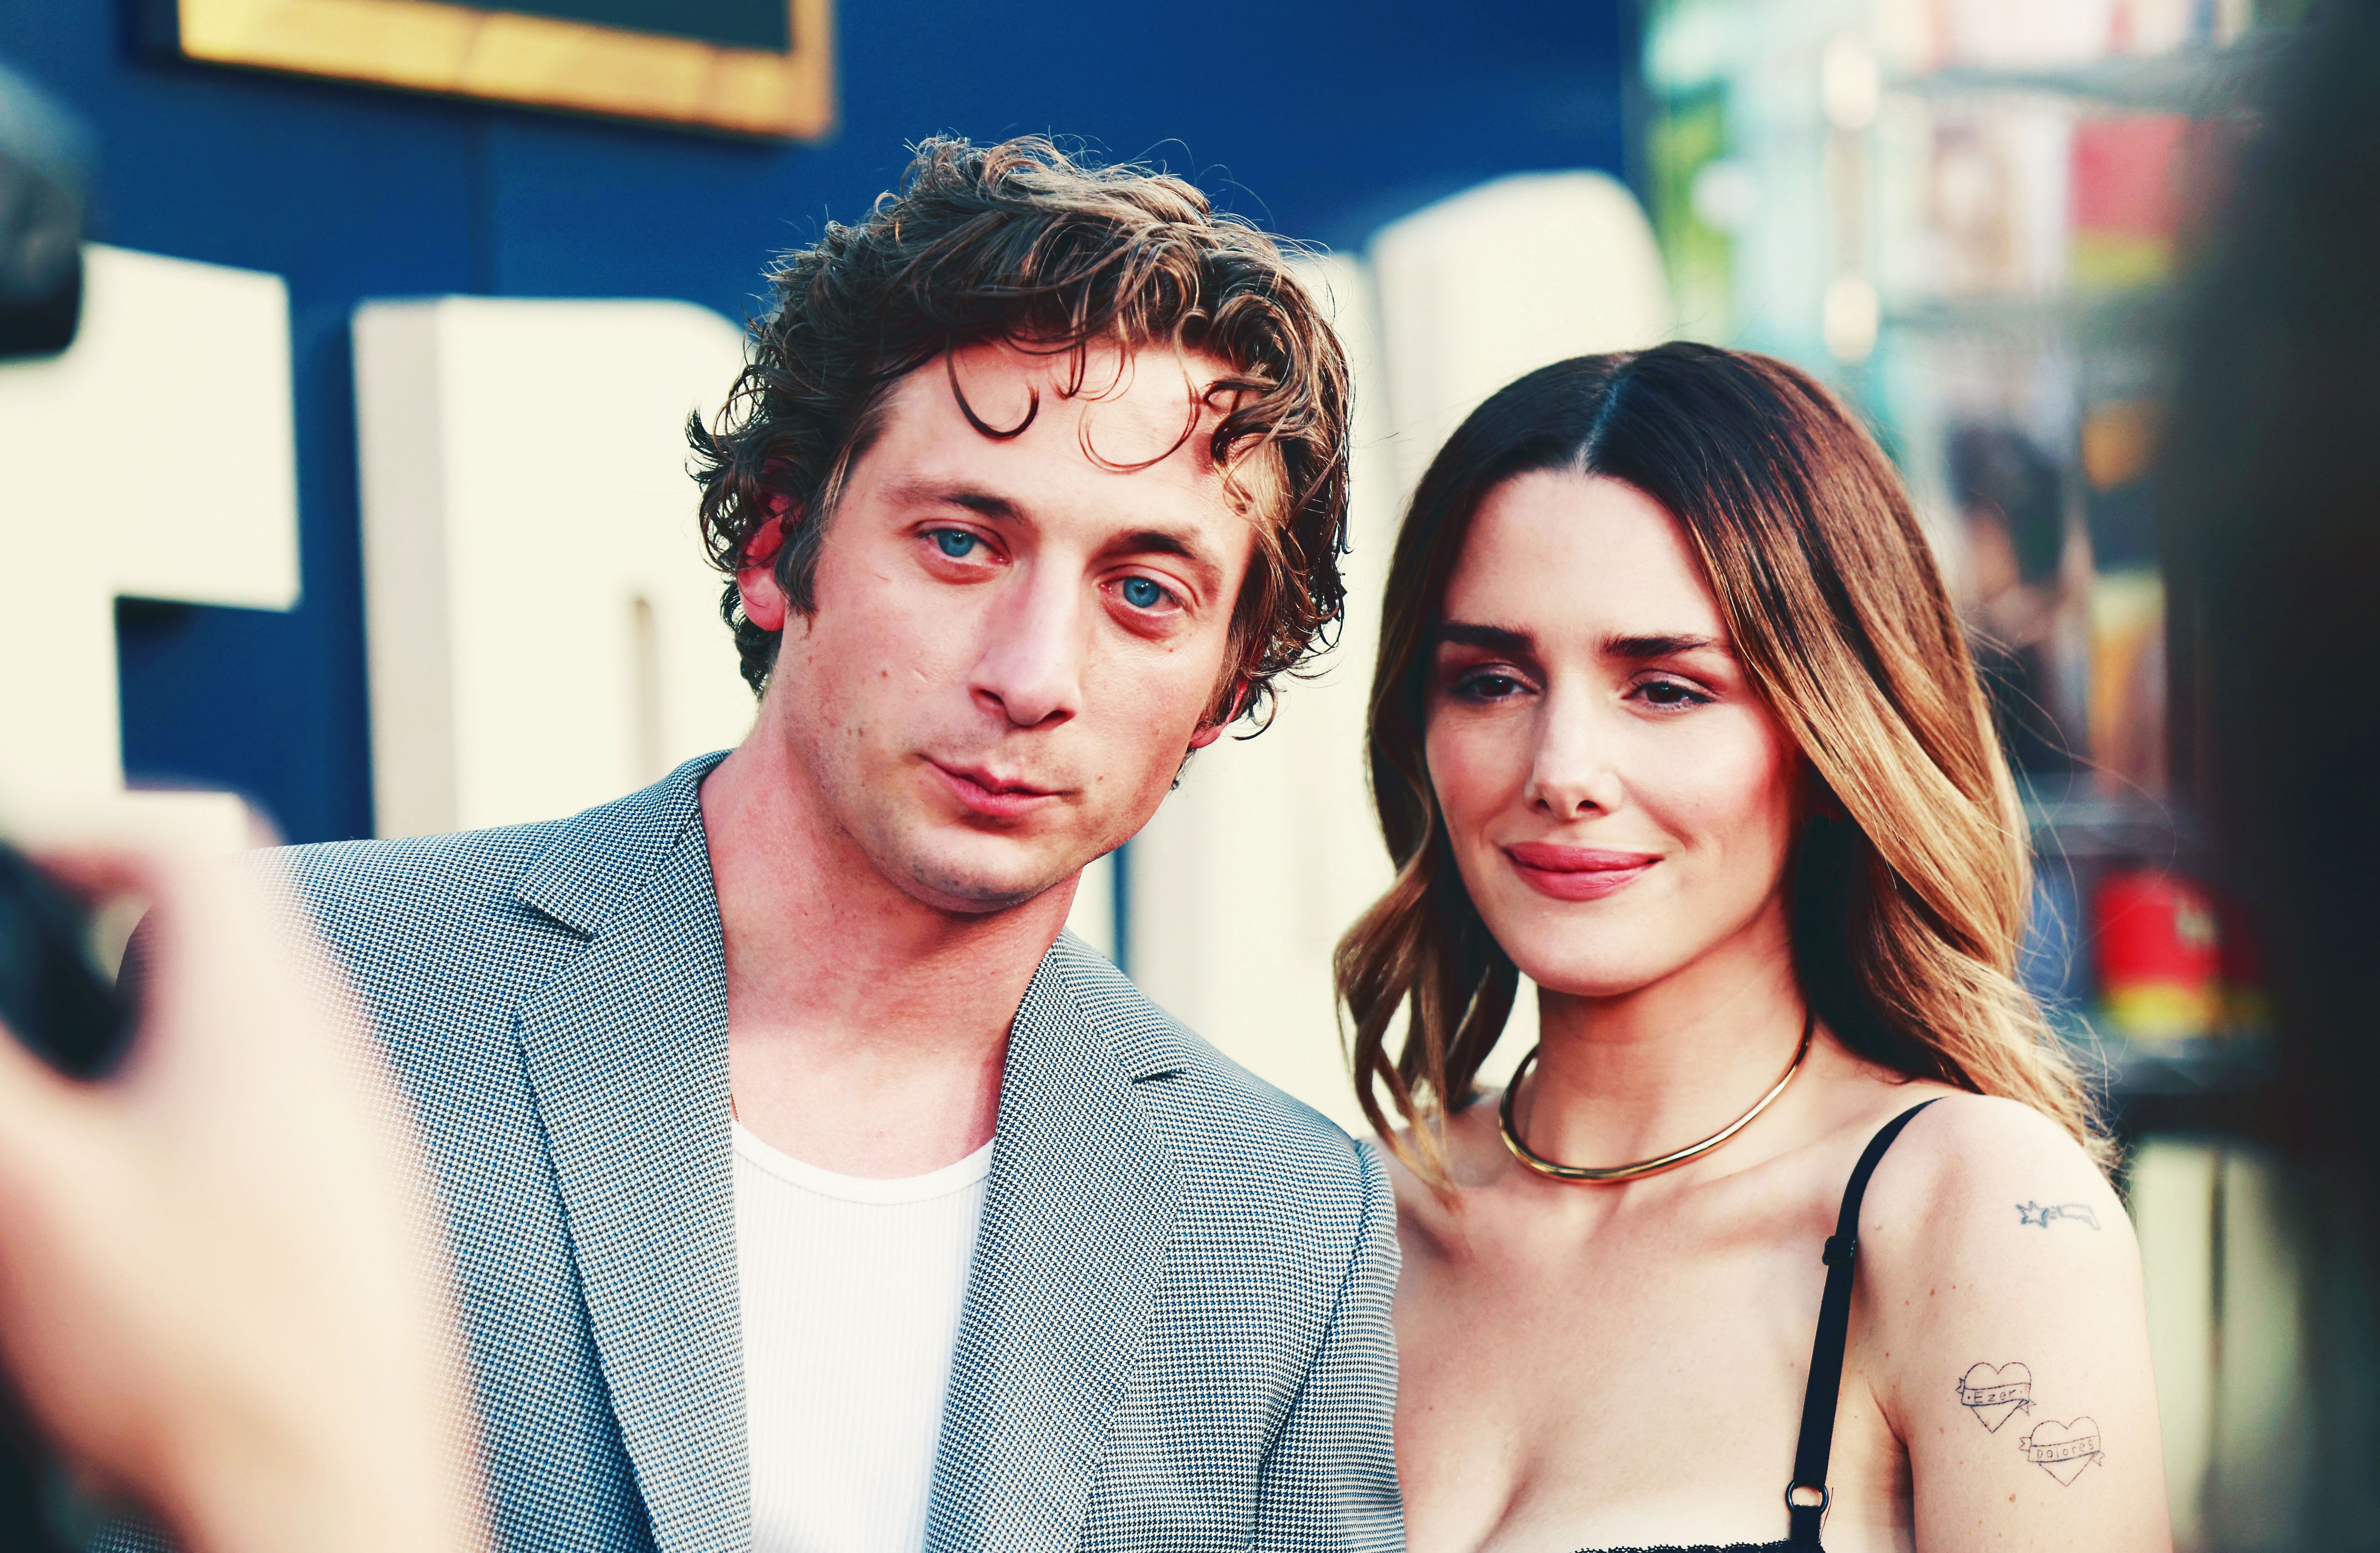 Jeremy Allen White and Addison Timlin Are Getting Divorced image picture